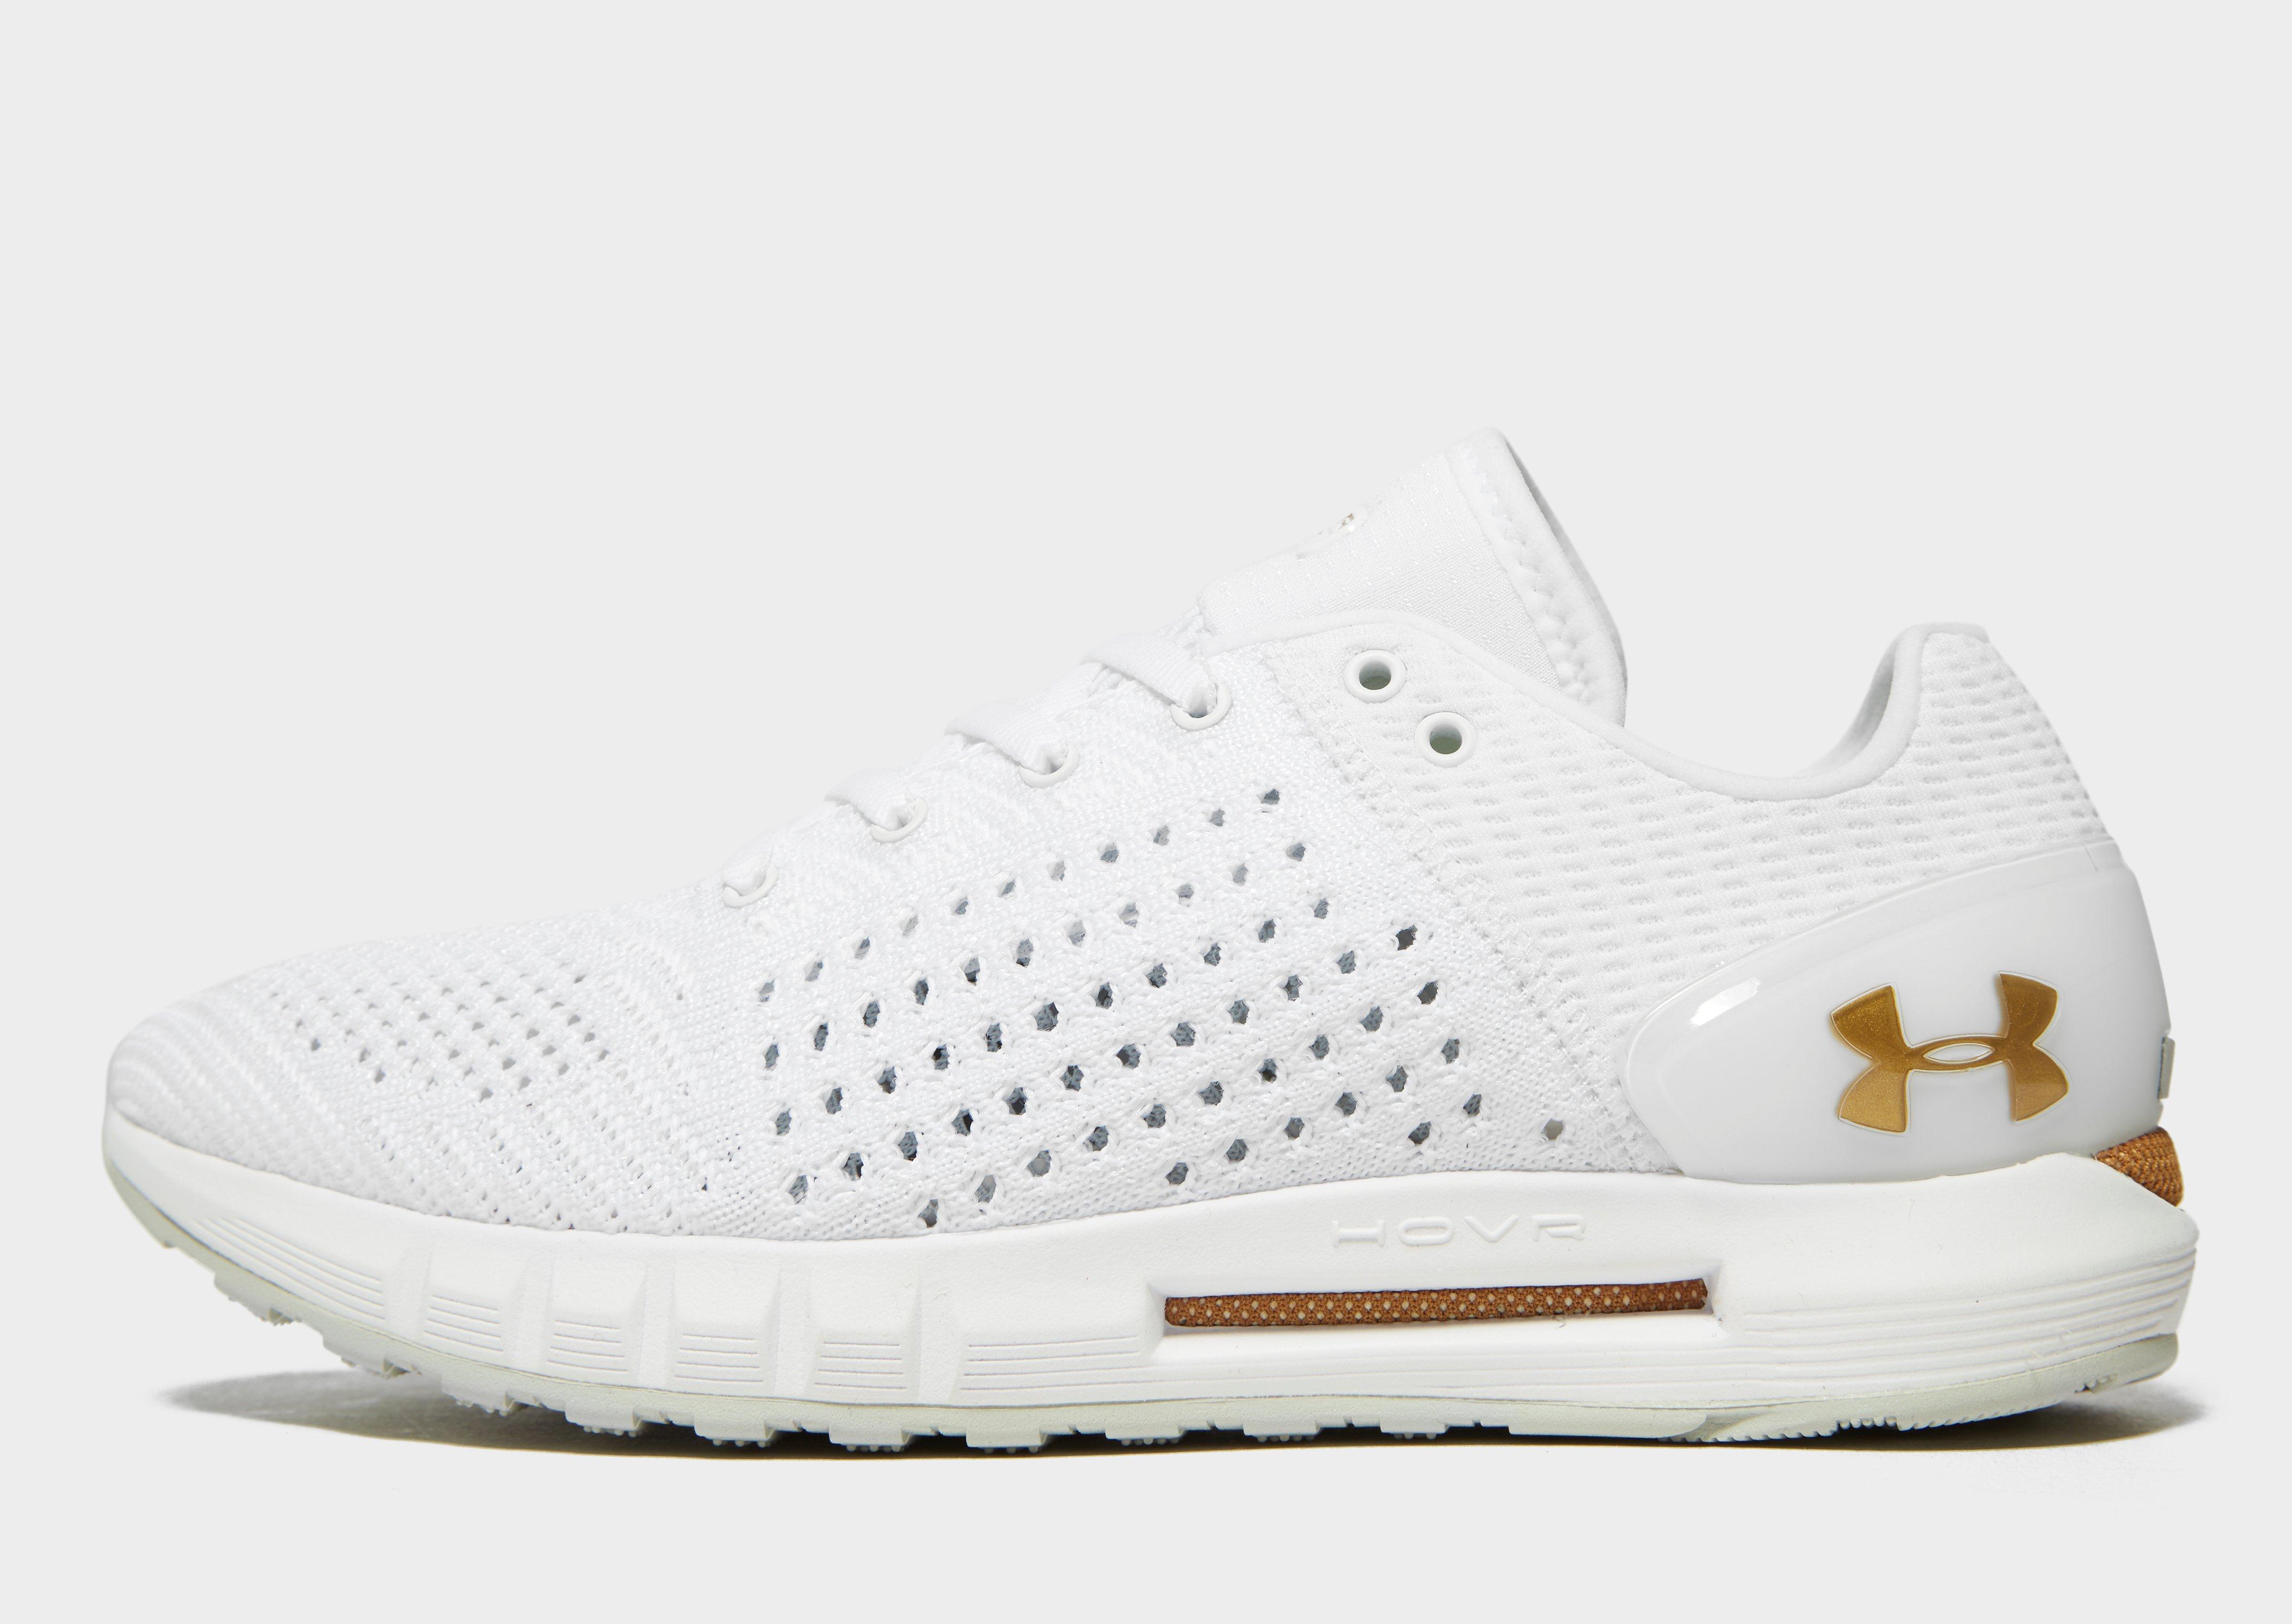 Under Armour Rubber Hovr Sonic in White 